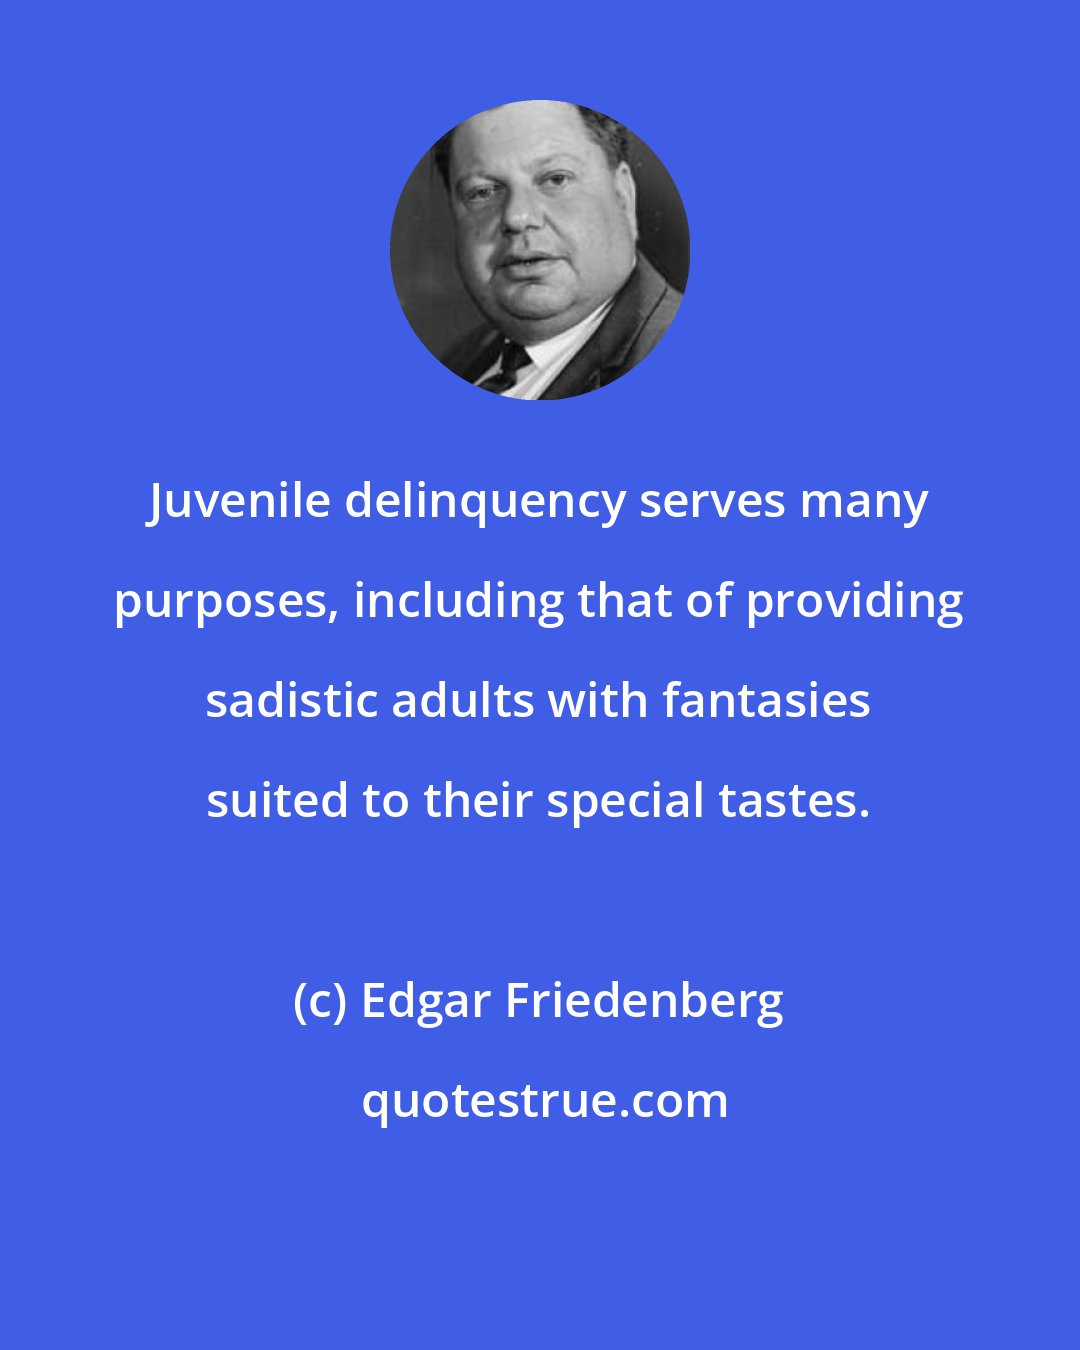 Edgar Friedenberg: Juvenile delinquency serves many purposes, including that of providing sadistic adults with fantasies suited to their special tastes.